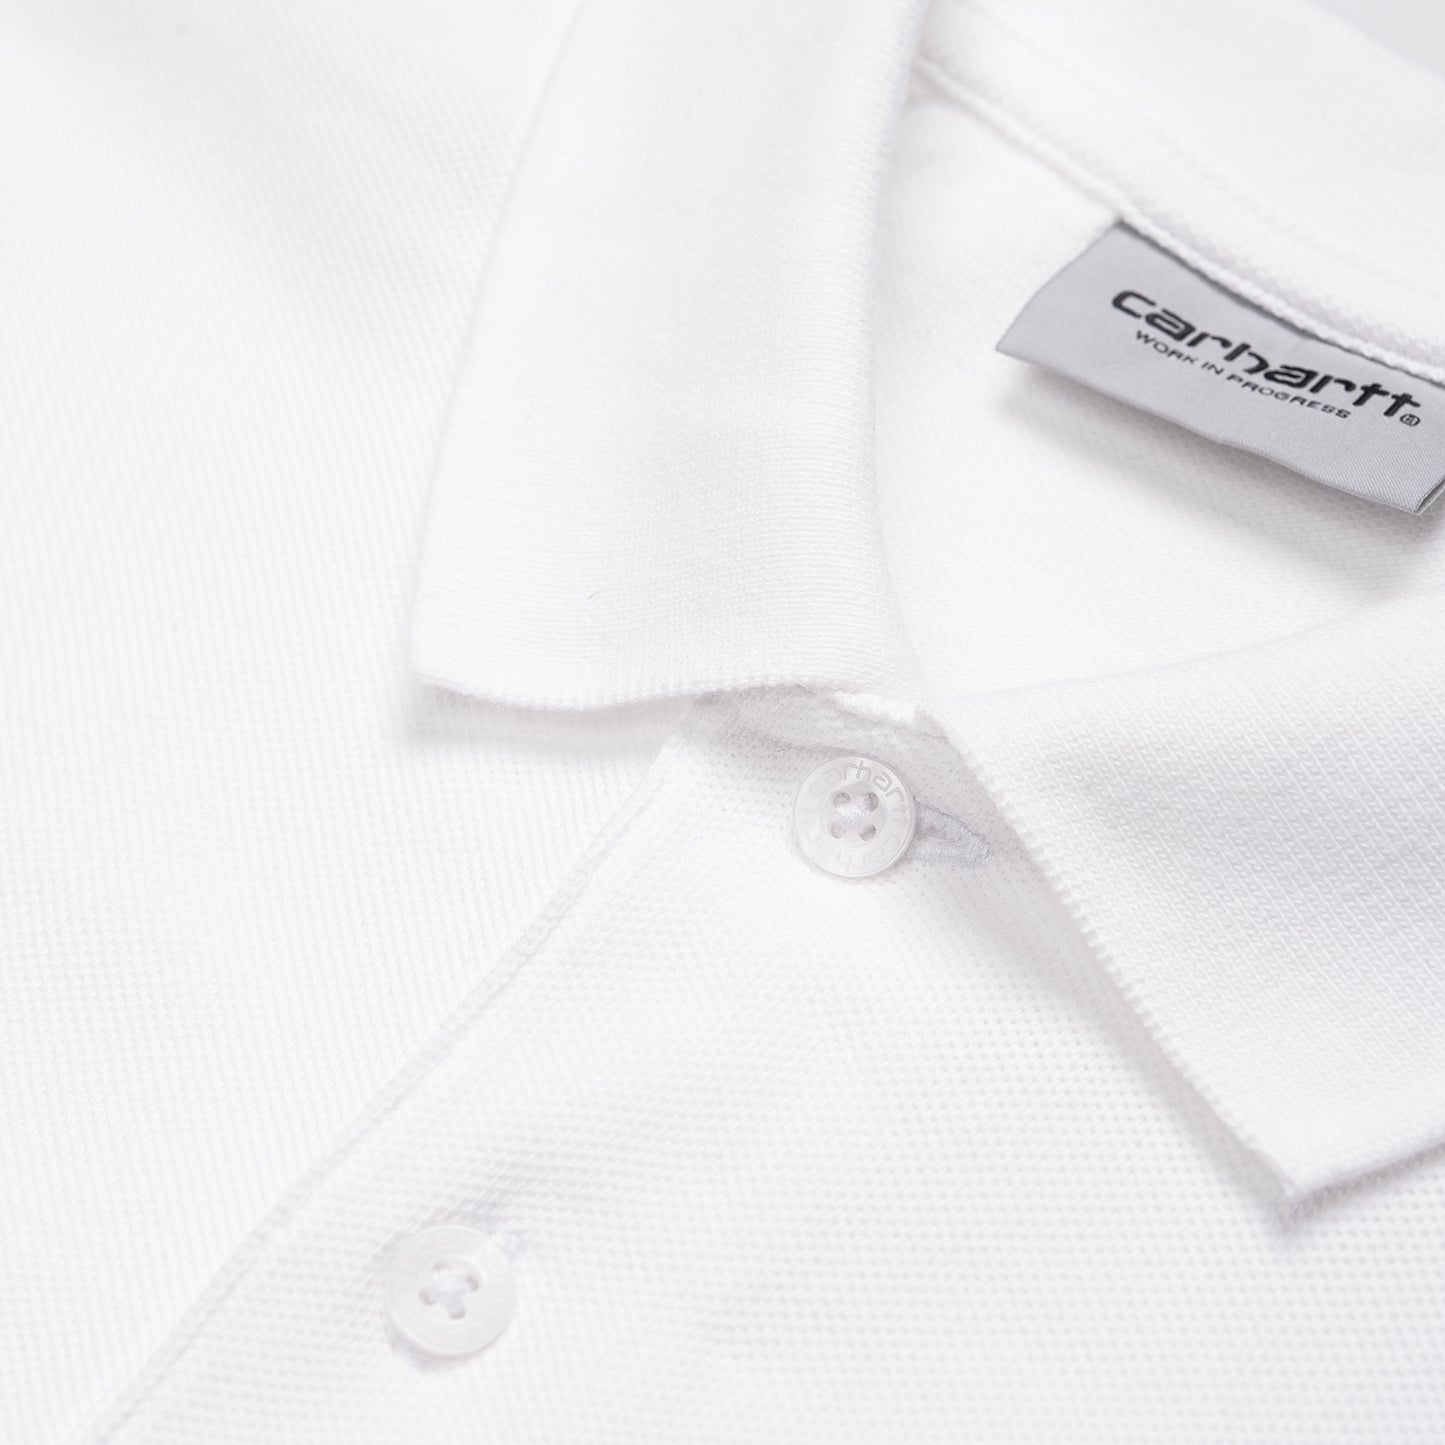 CARHARTT WIP S/S Chase Pique Polo - White/Gold